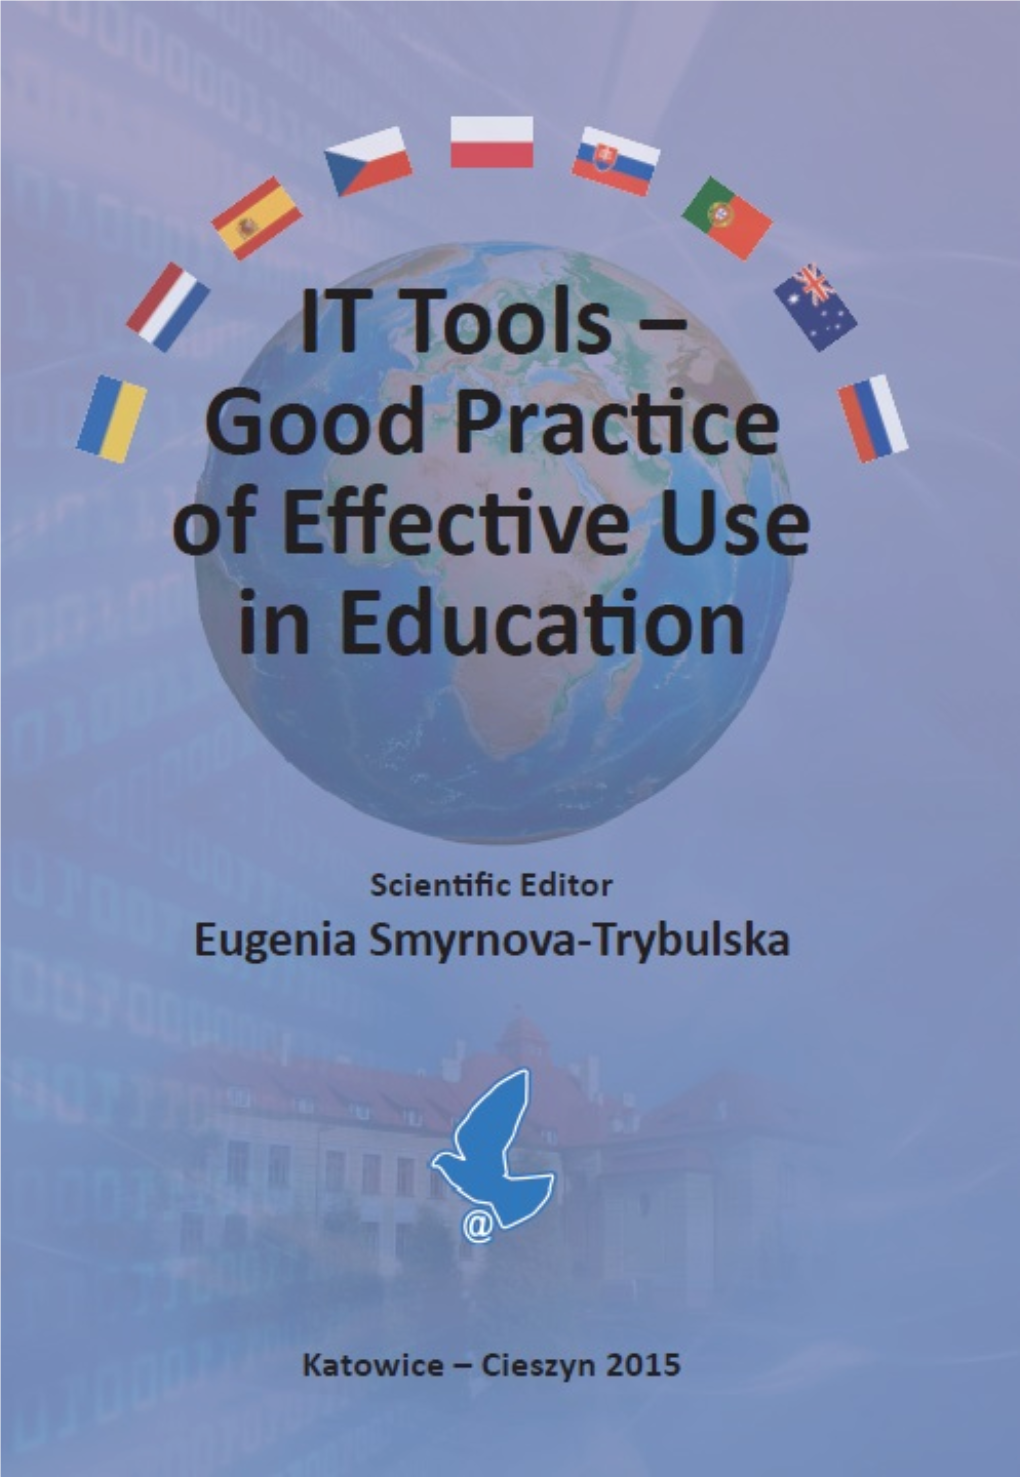 IT Tools – Good Practice of Effective Use in Education